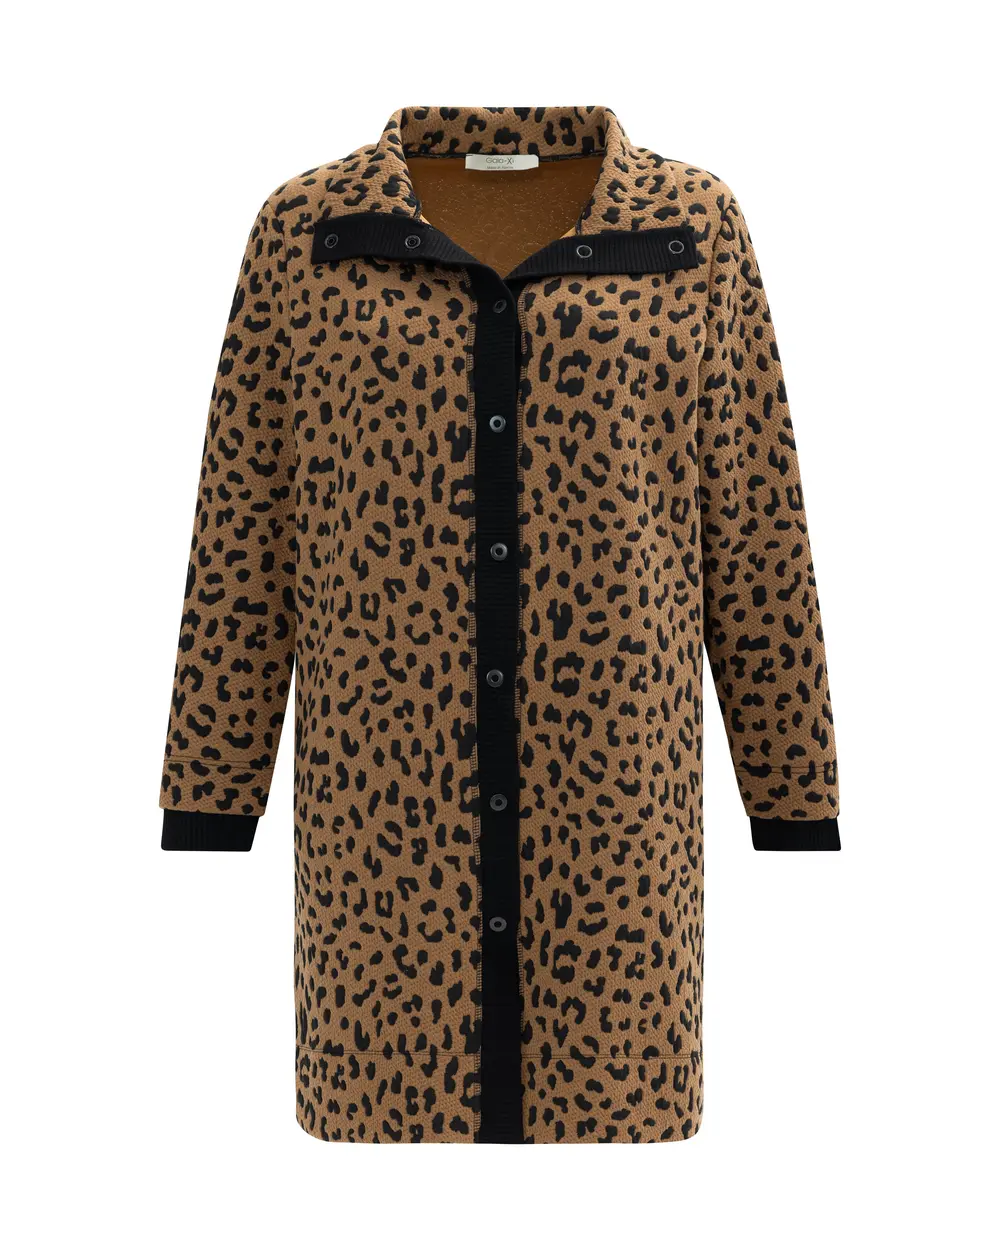 Plus Size Leopard Patterned Ribbed Cape